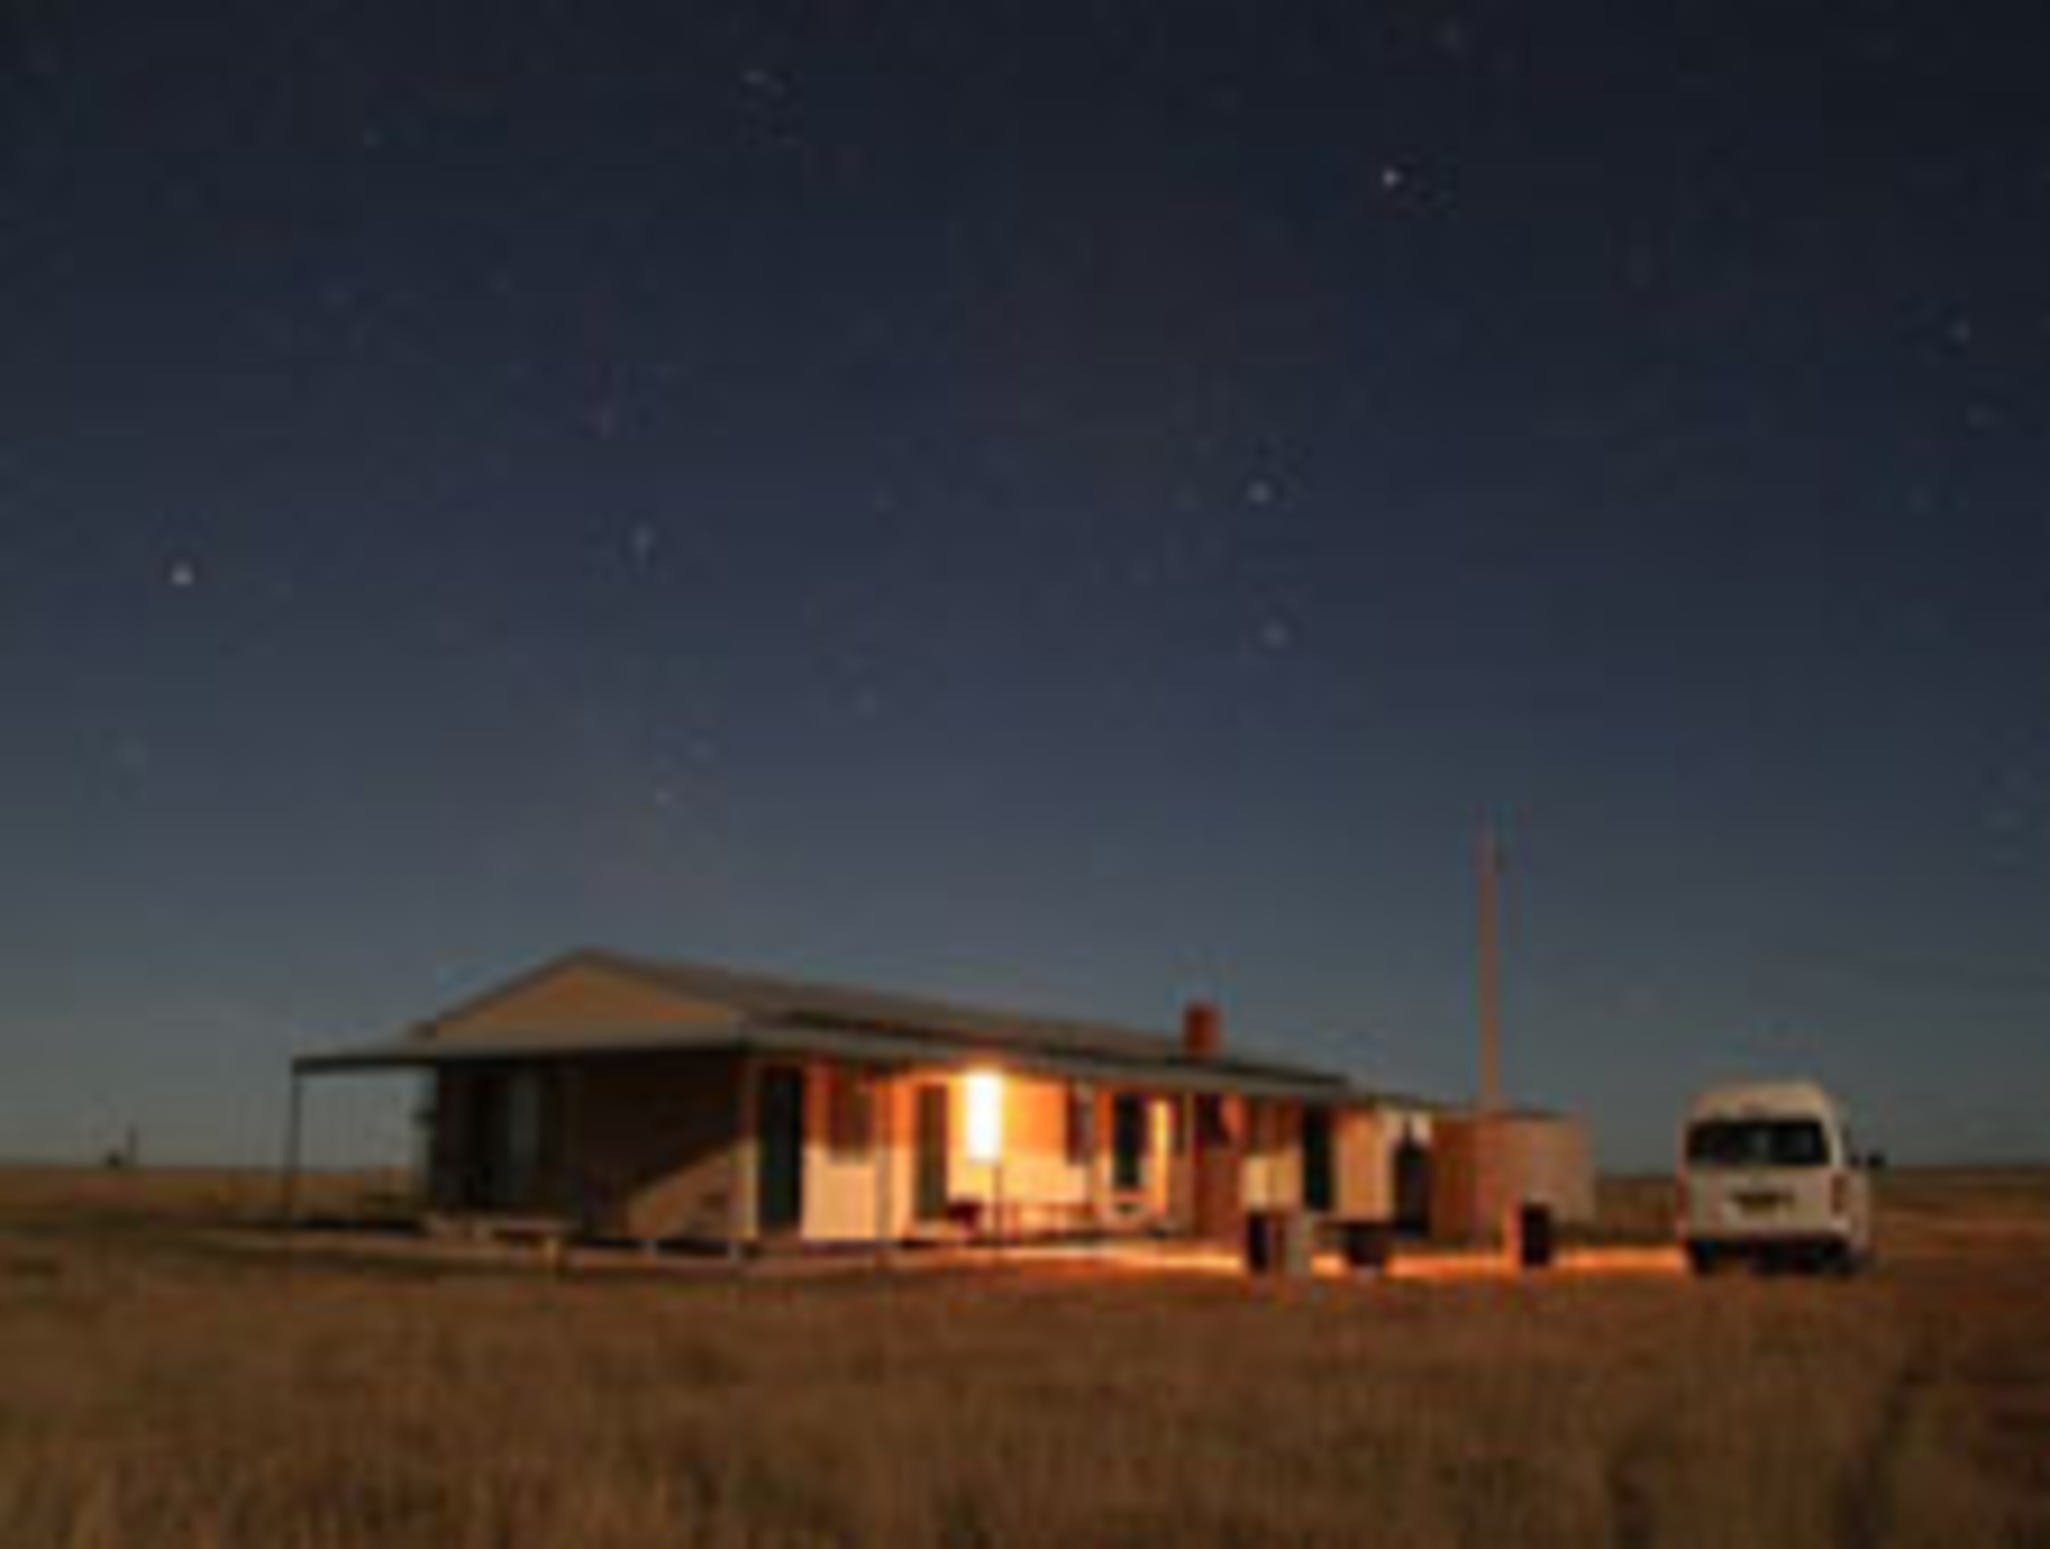 Food  Huts by Mt Oxley - Accommodation Port Hedland